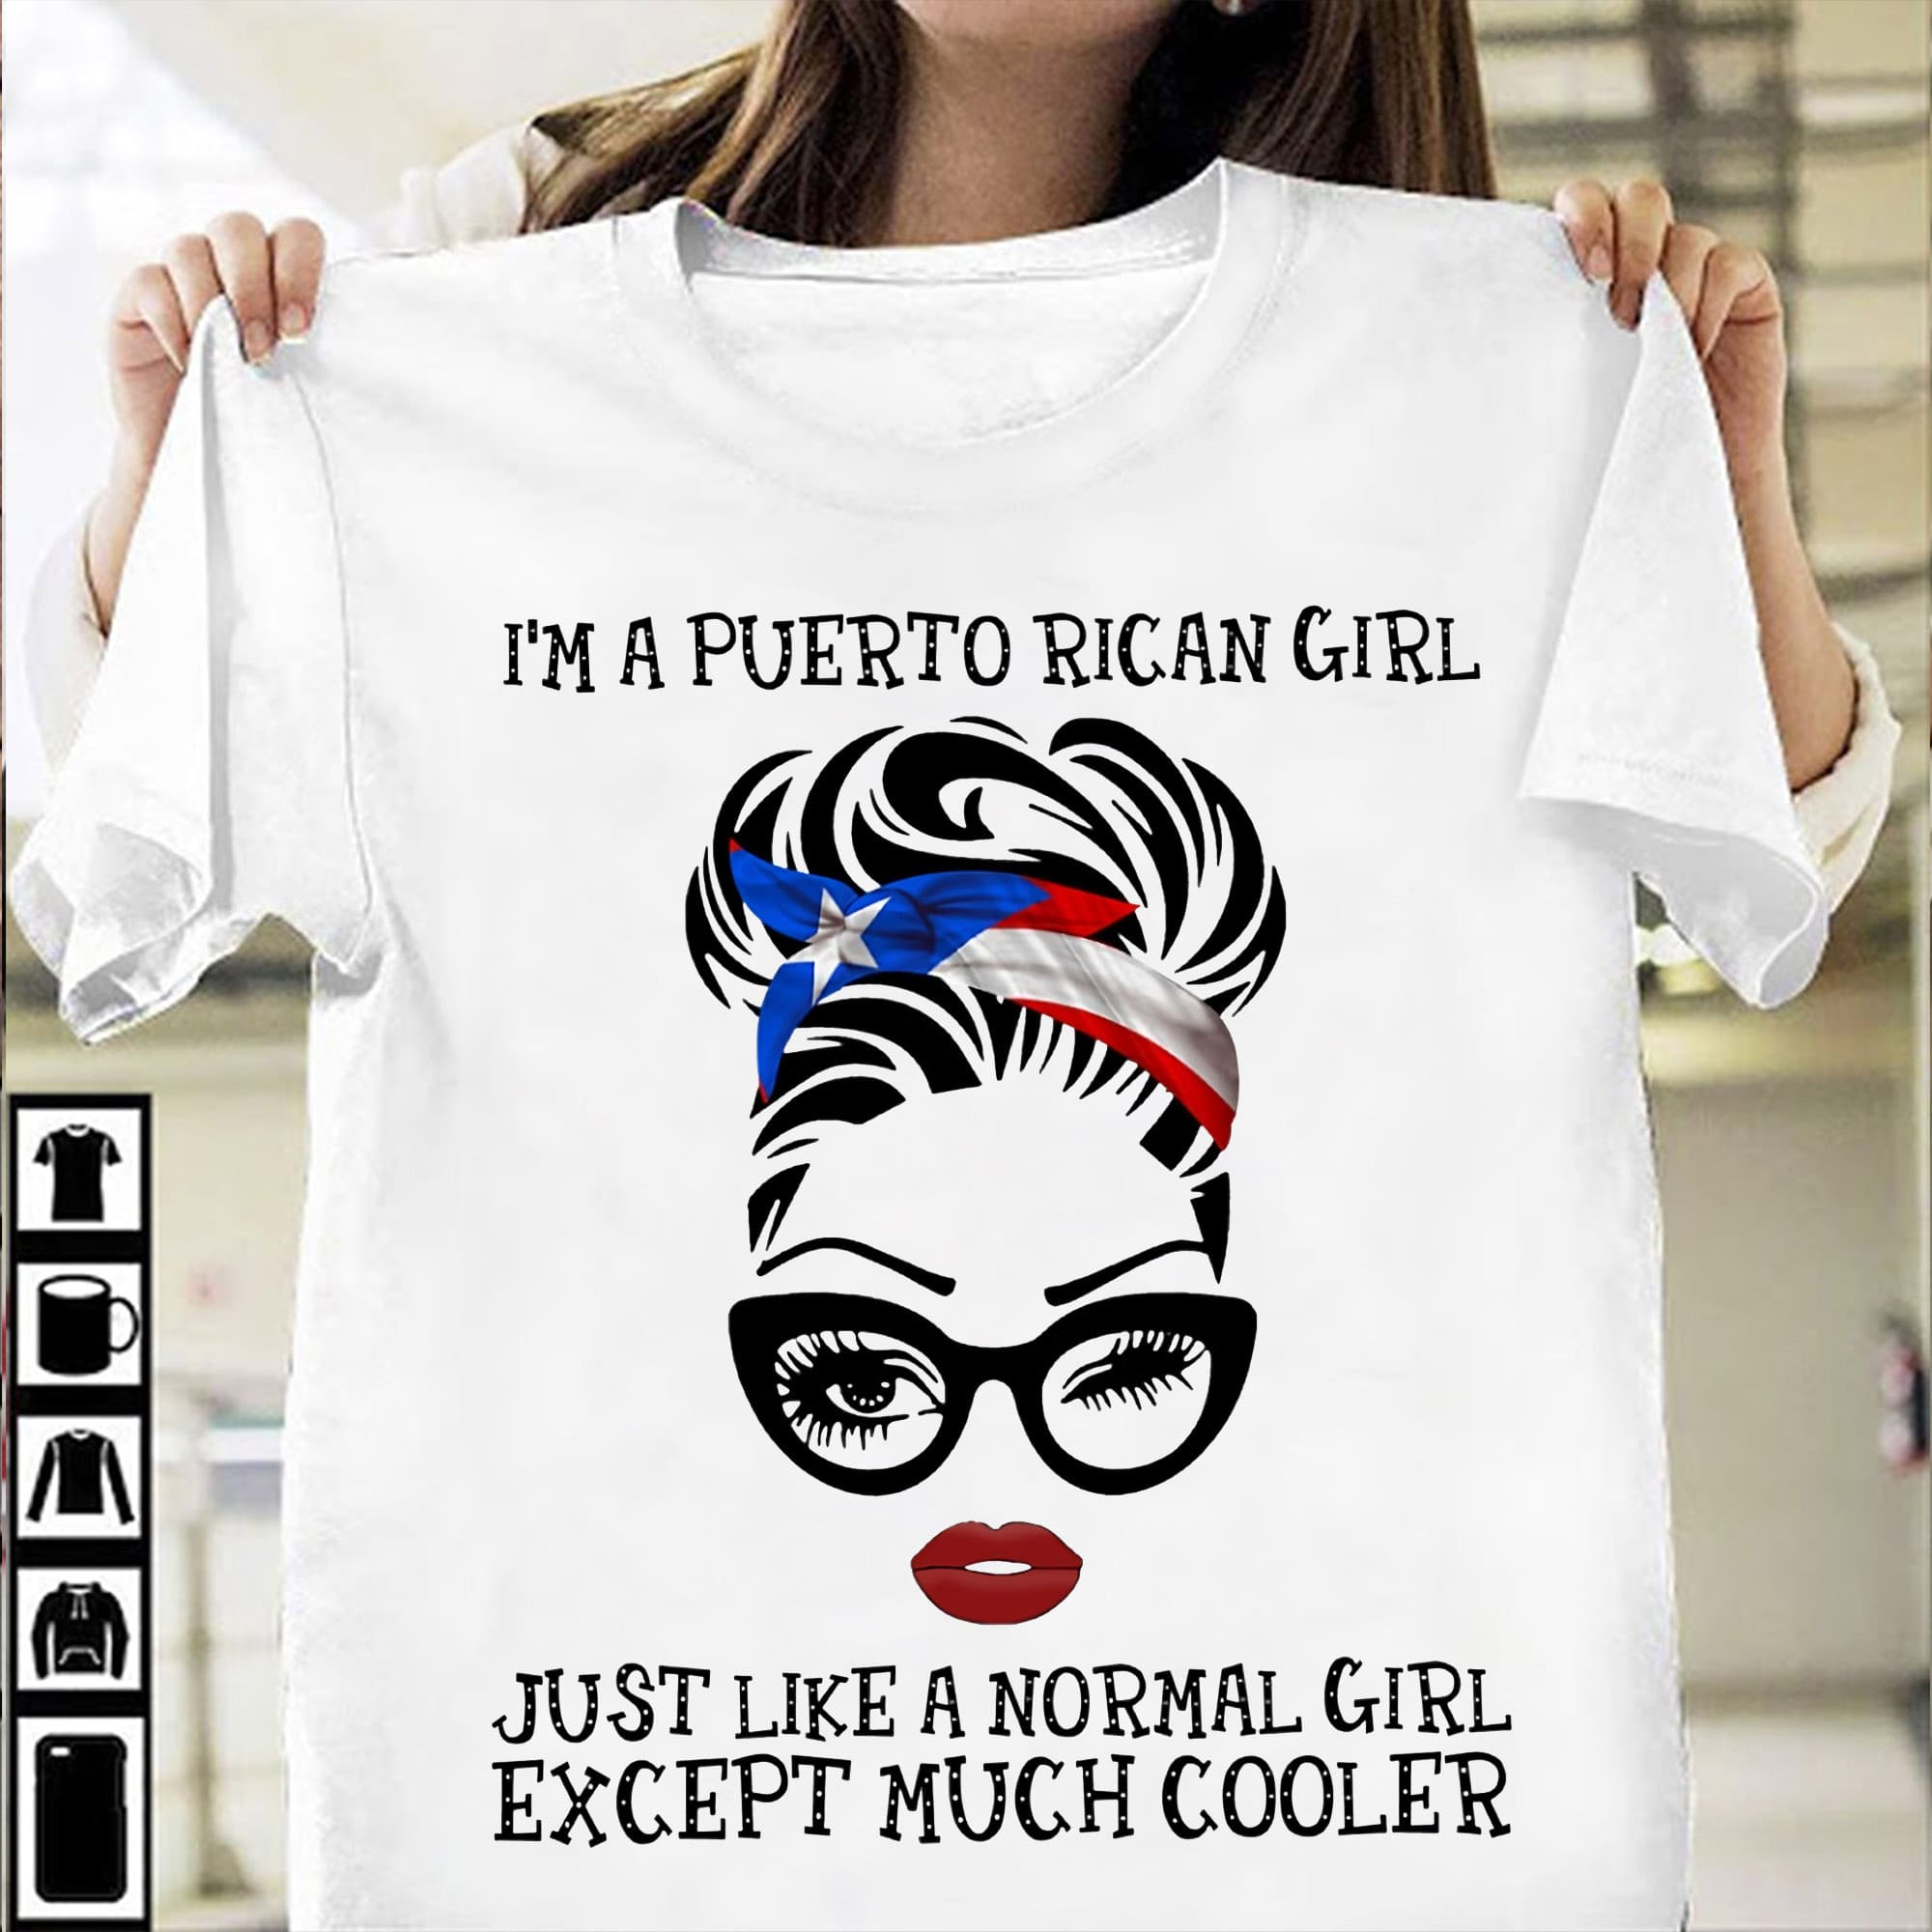 I'm a Puerto Ricangirl just like a normal girl except much cooler - Cool Purto Rican woman